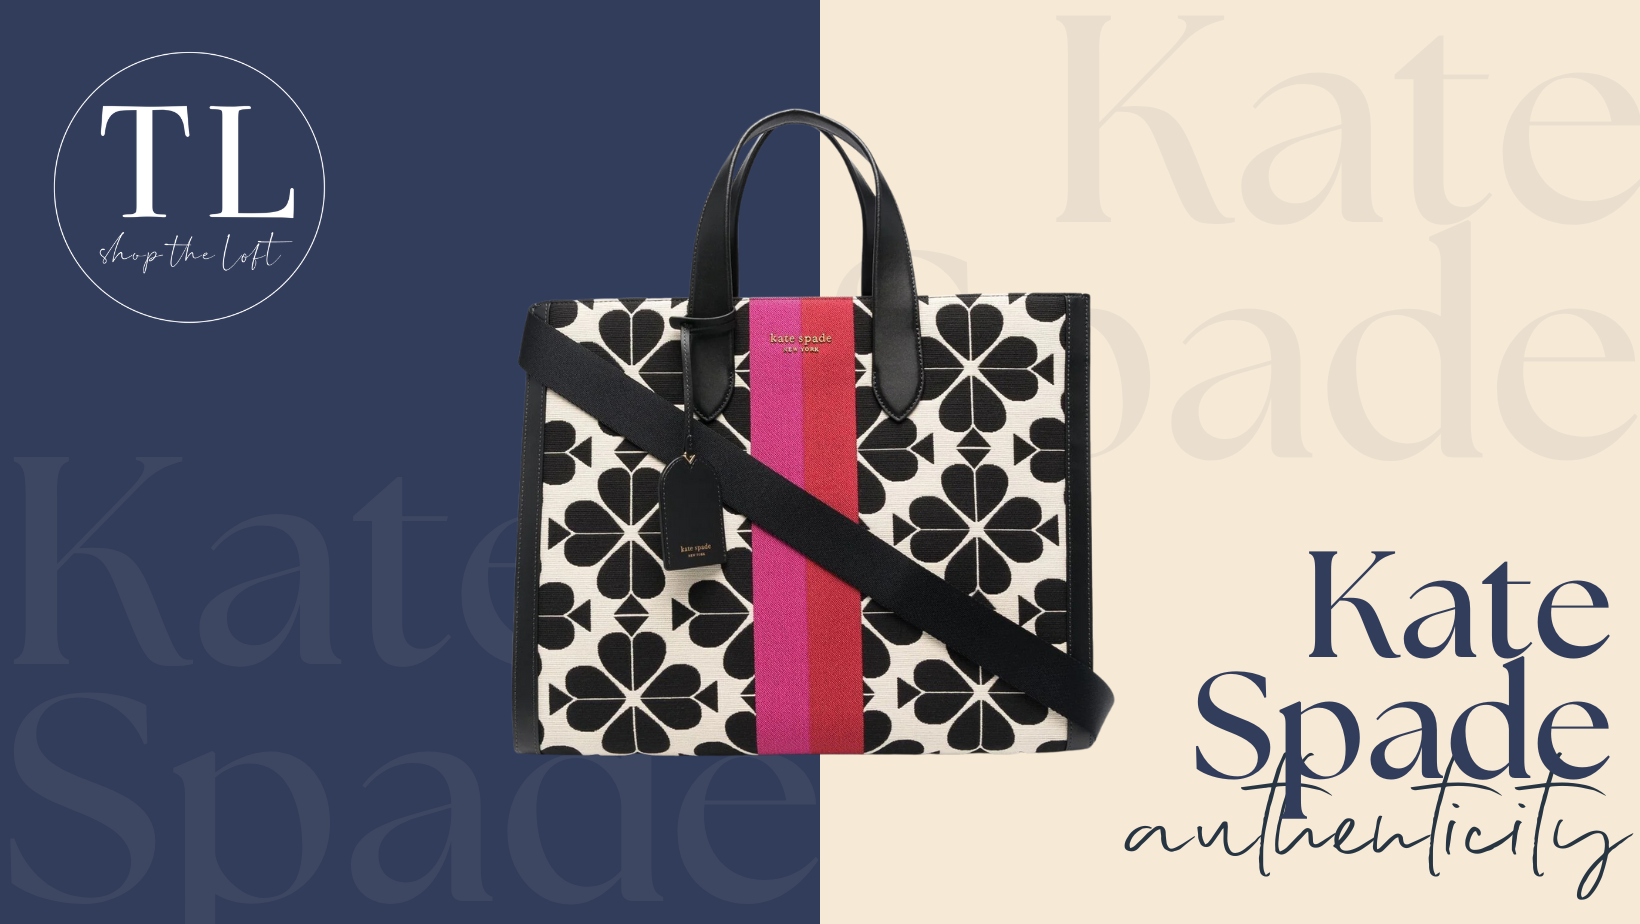 How to Spot Authentic Kate Spade: A Guide to Authenticating Your Purchase